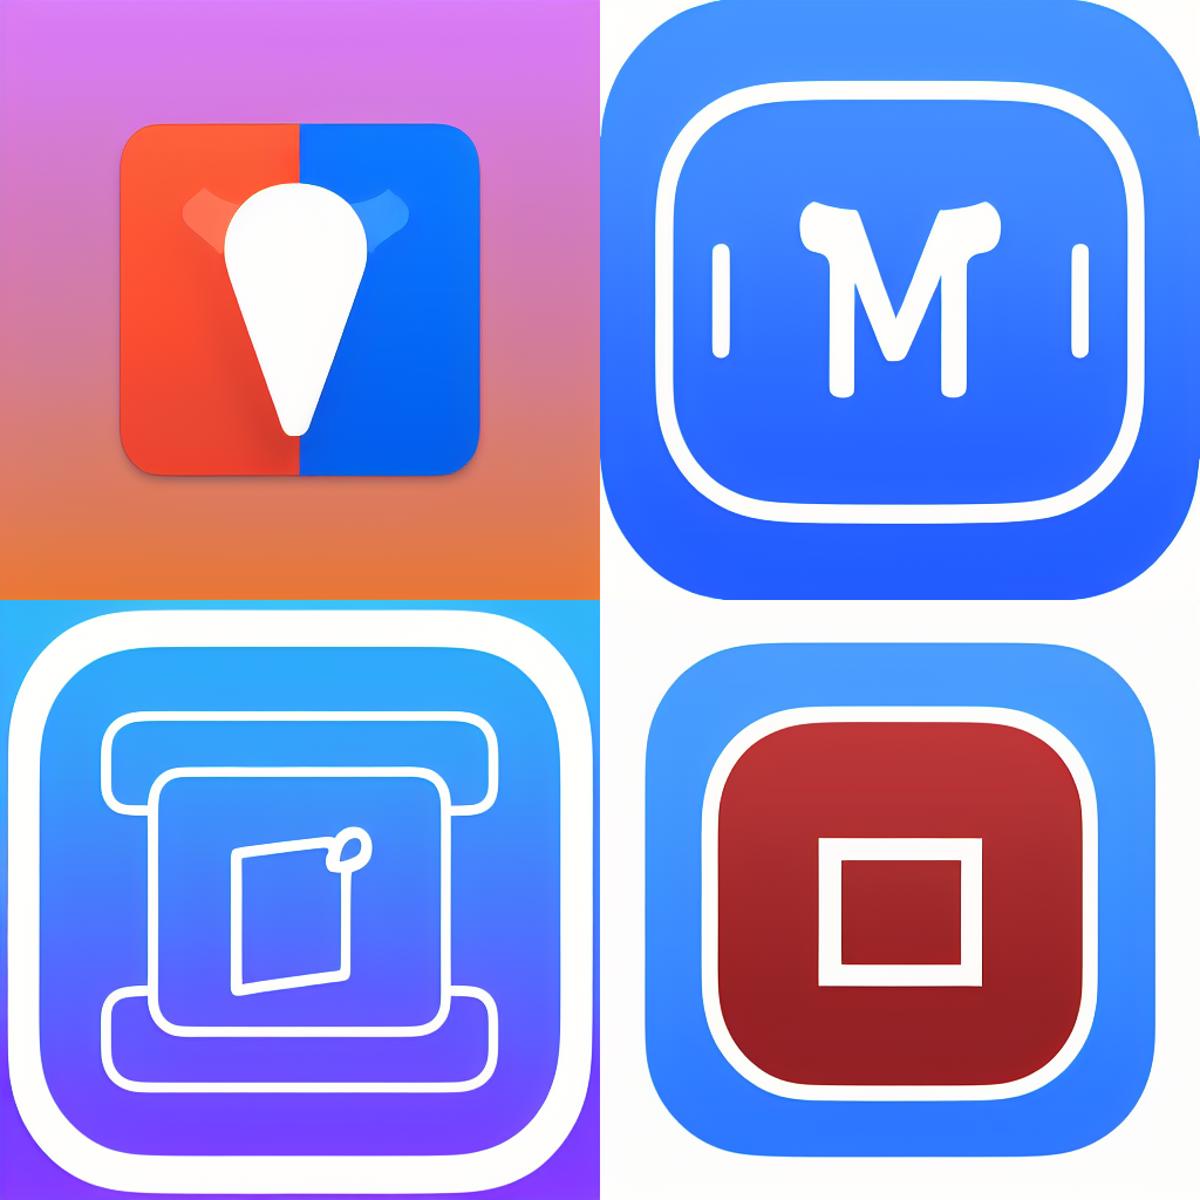 Modern Icons for Apps image by saalde